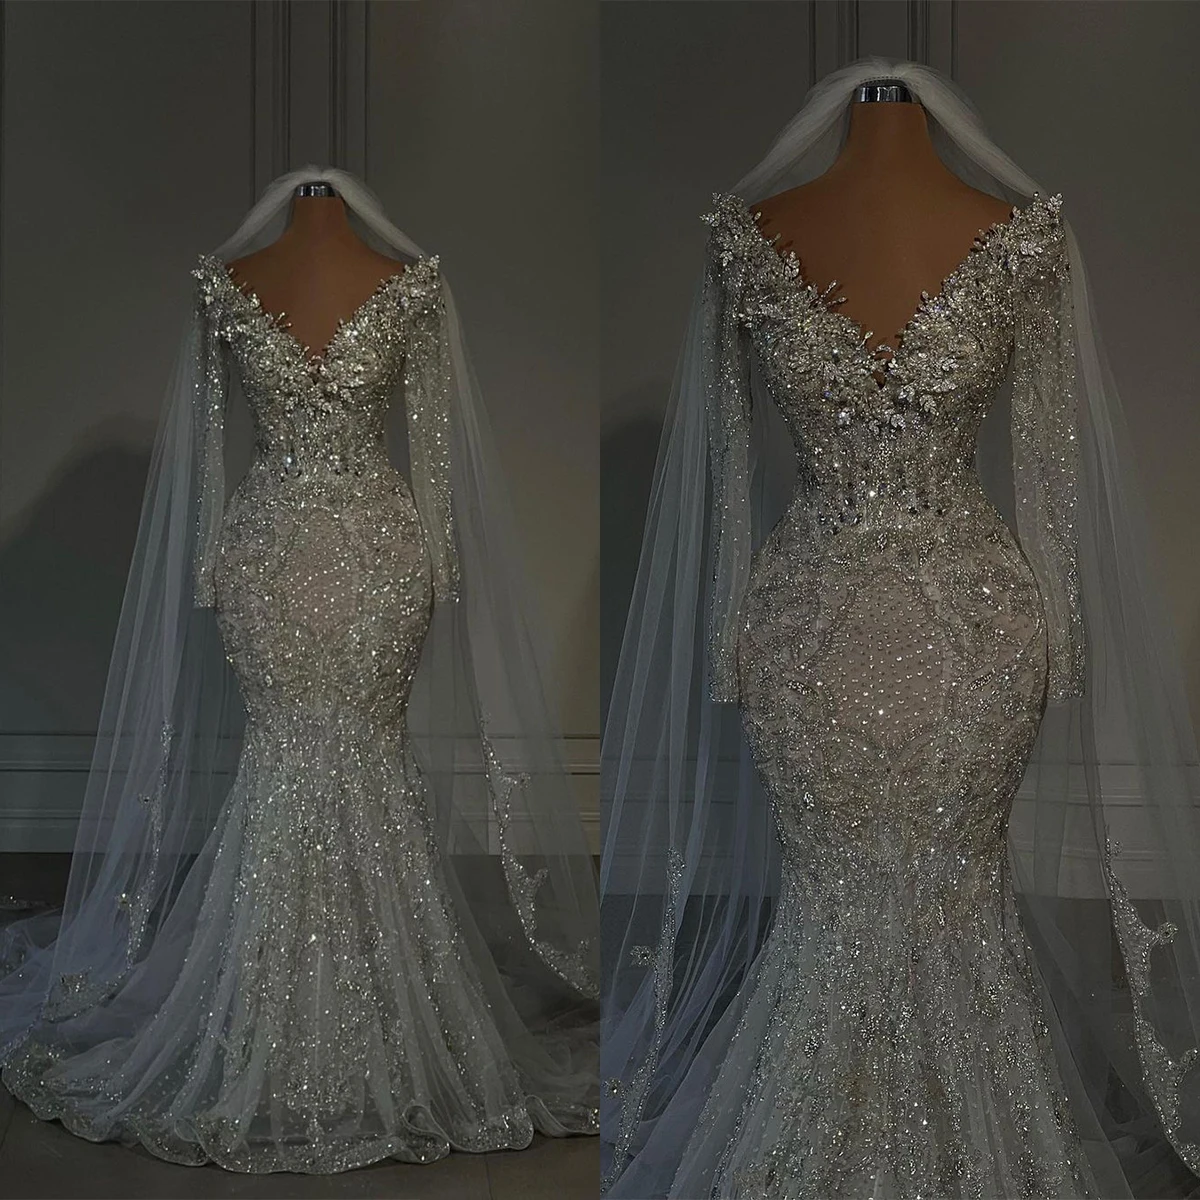 Sparkling Mermaid Gown Wedding Dresses V-Neck Lace Bridal Gowns Long-Sleeve Sweep Train Big Size Custom Size Colour 1